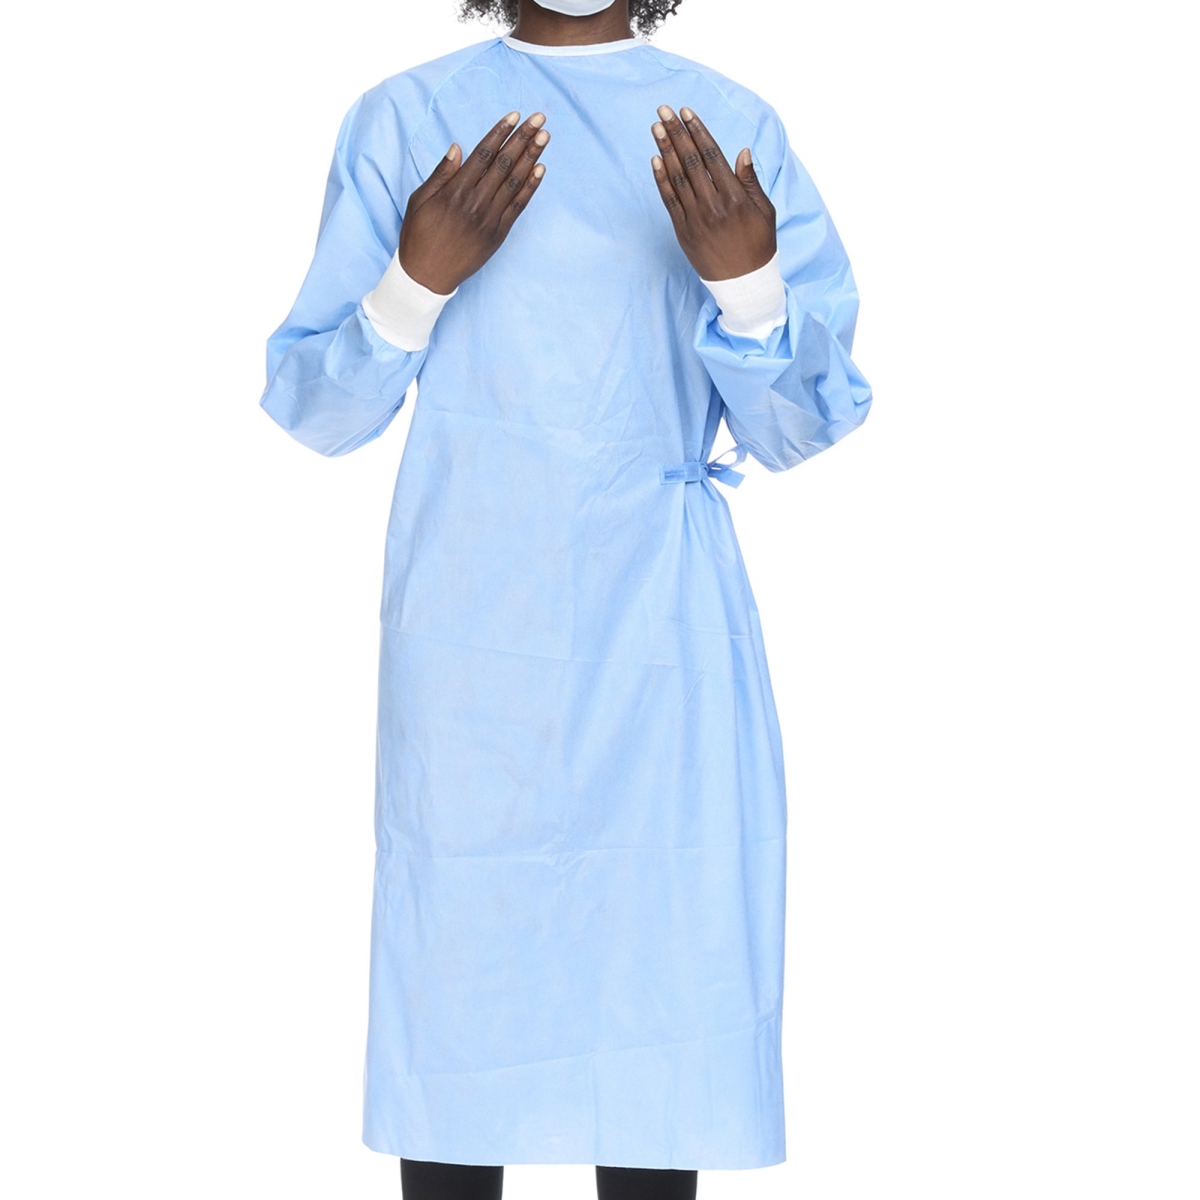 654134-EA Non-Reinforced Surgical Gown with Towel, Blue - Large -  Halyard Basics, 654134_EA